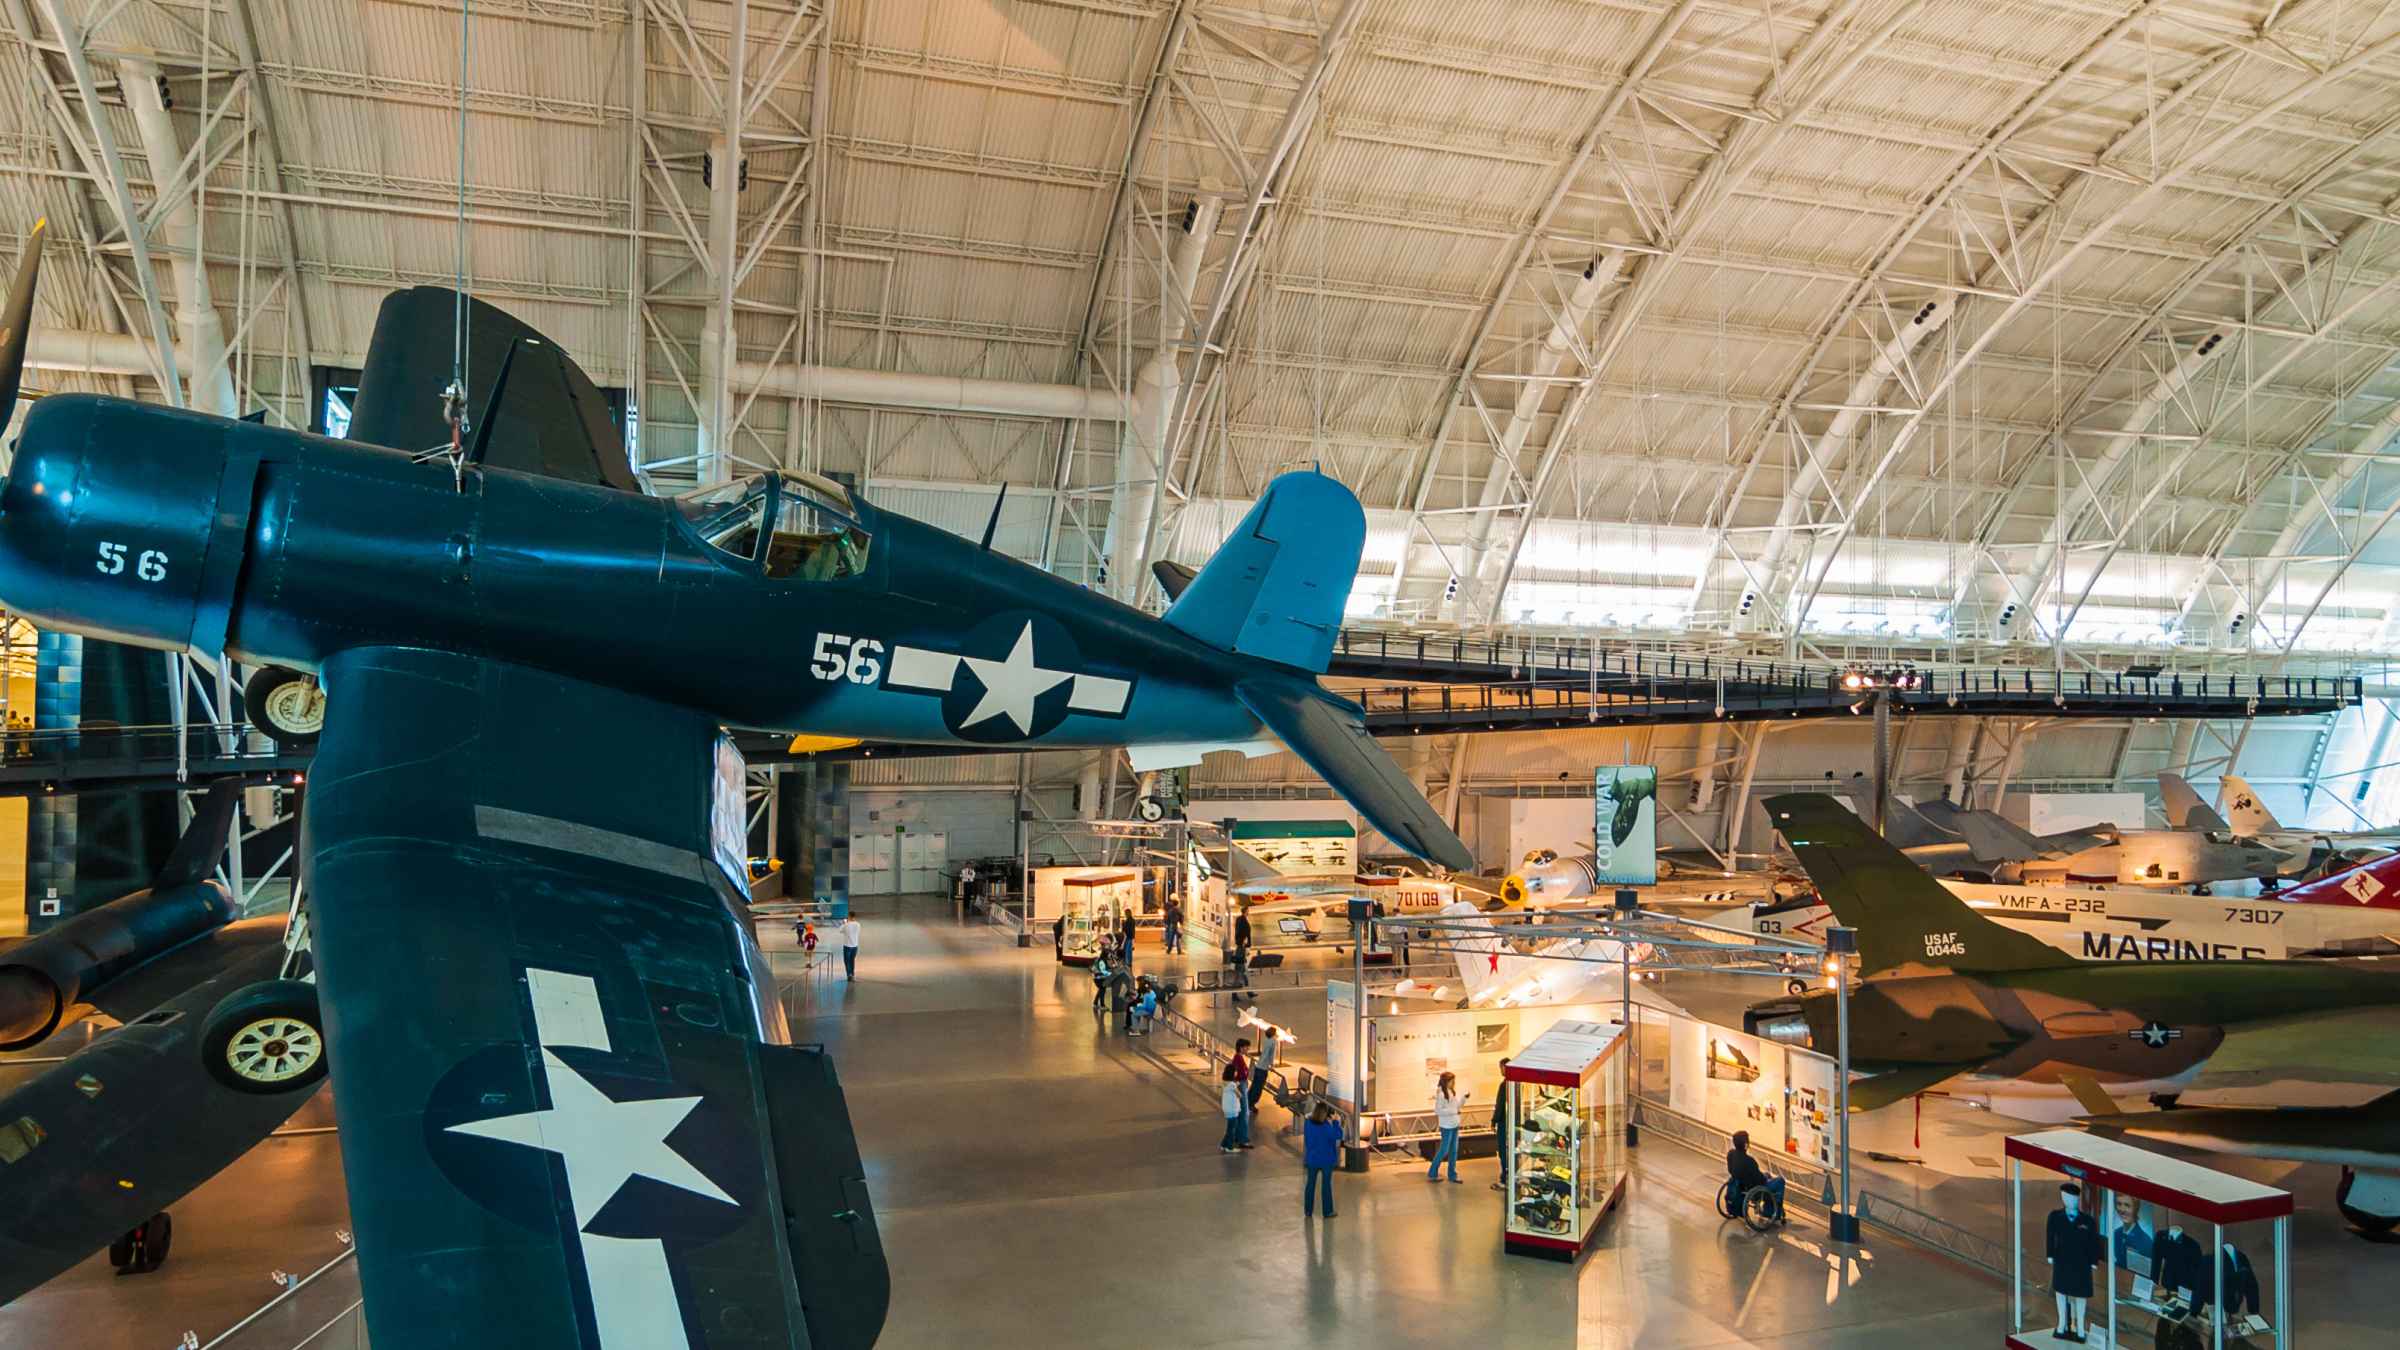 Smithsonian Air & Space Museum, Washington, DC Book Tickets & Tours